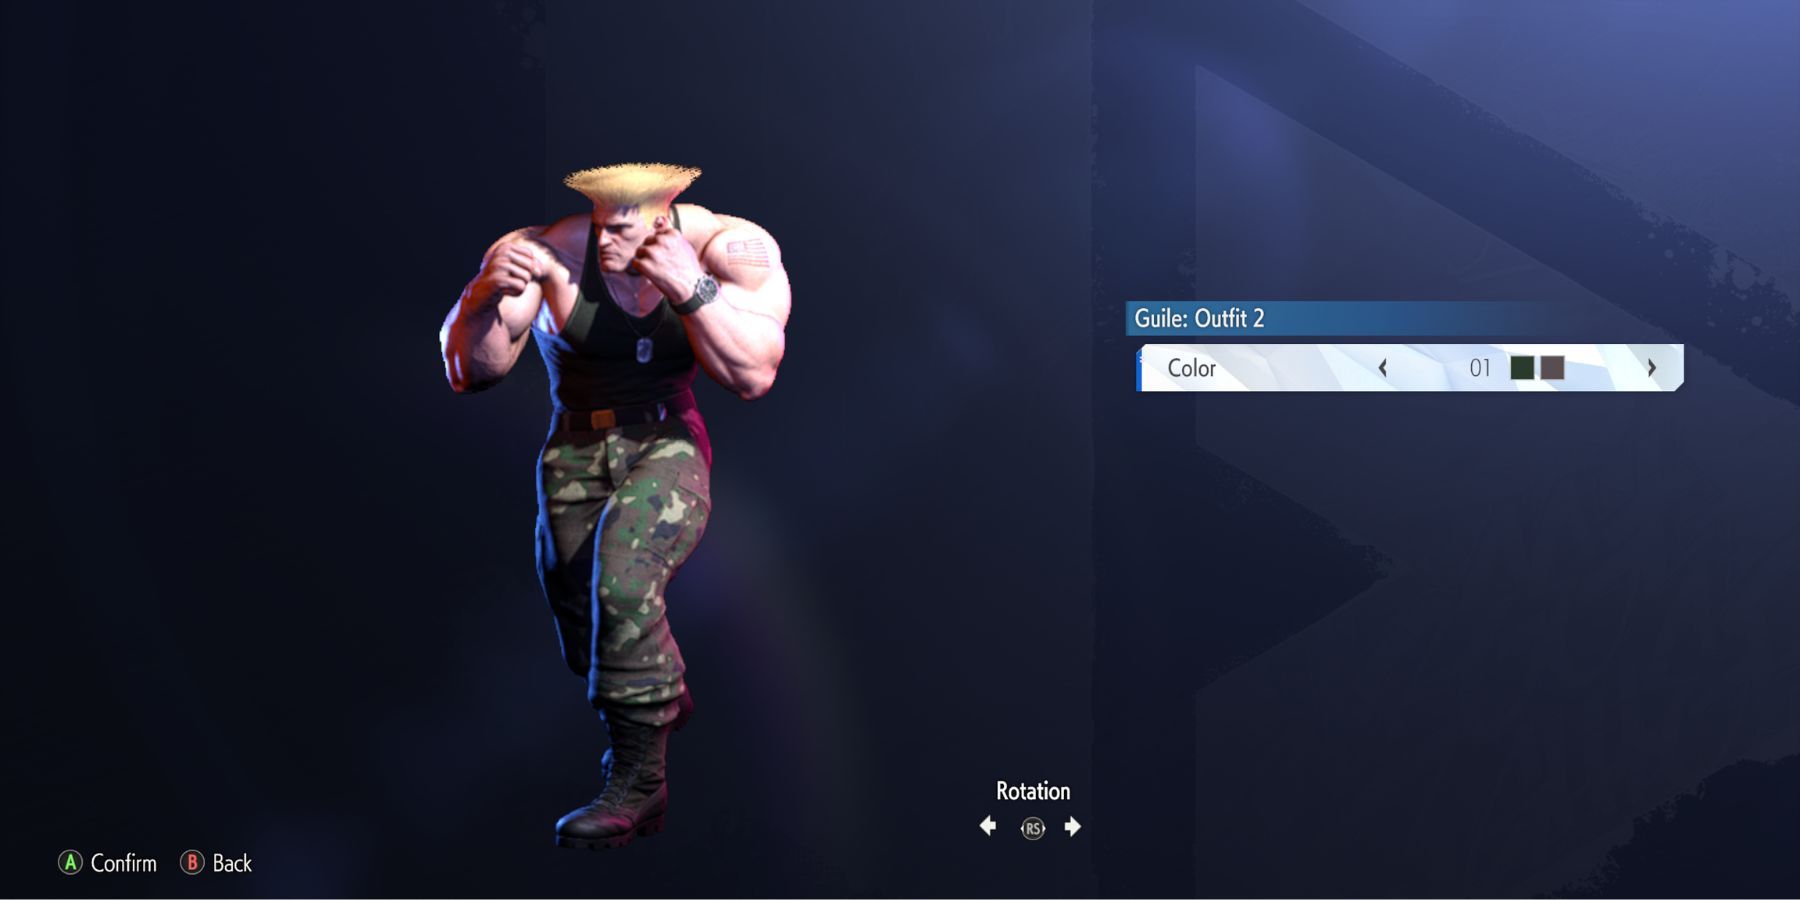 image showing guile's outfit 2 in street fighter 6.